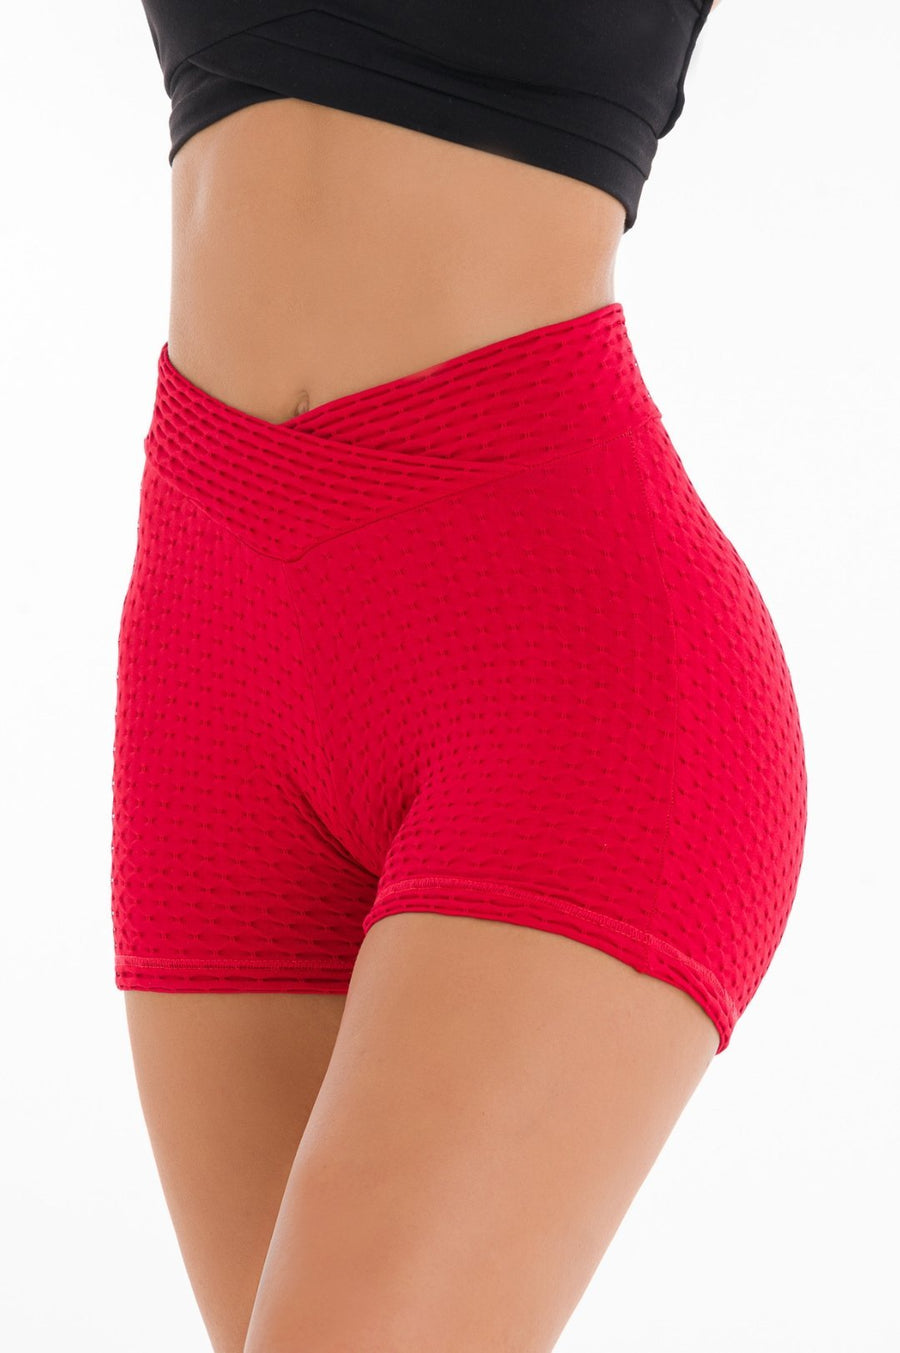 LIFTED - BOOTY SHORTS - RED - StrongByMinx